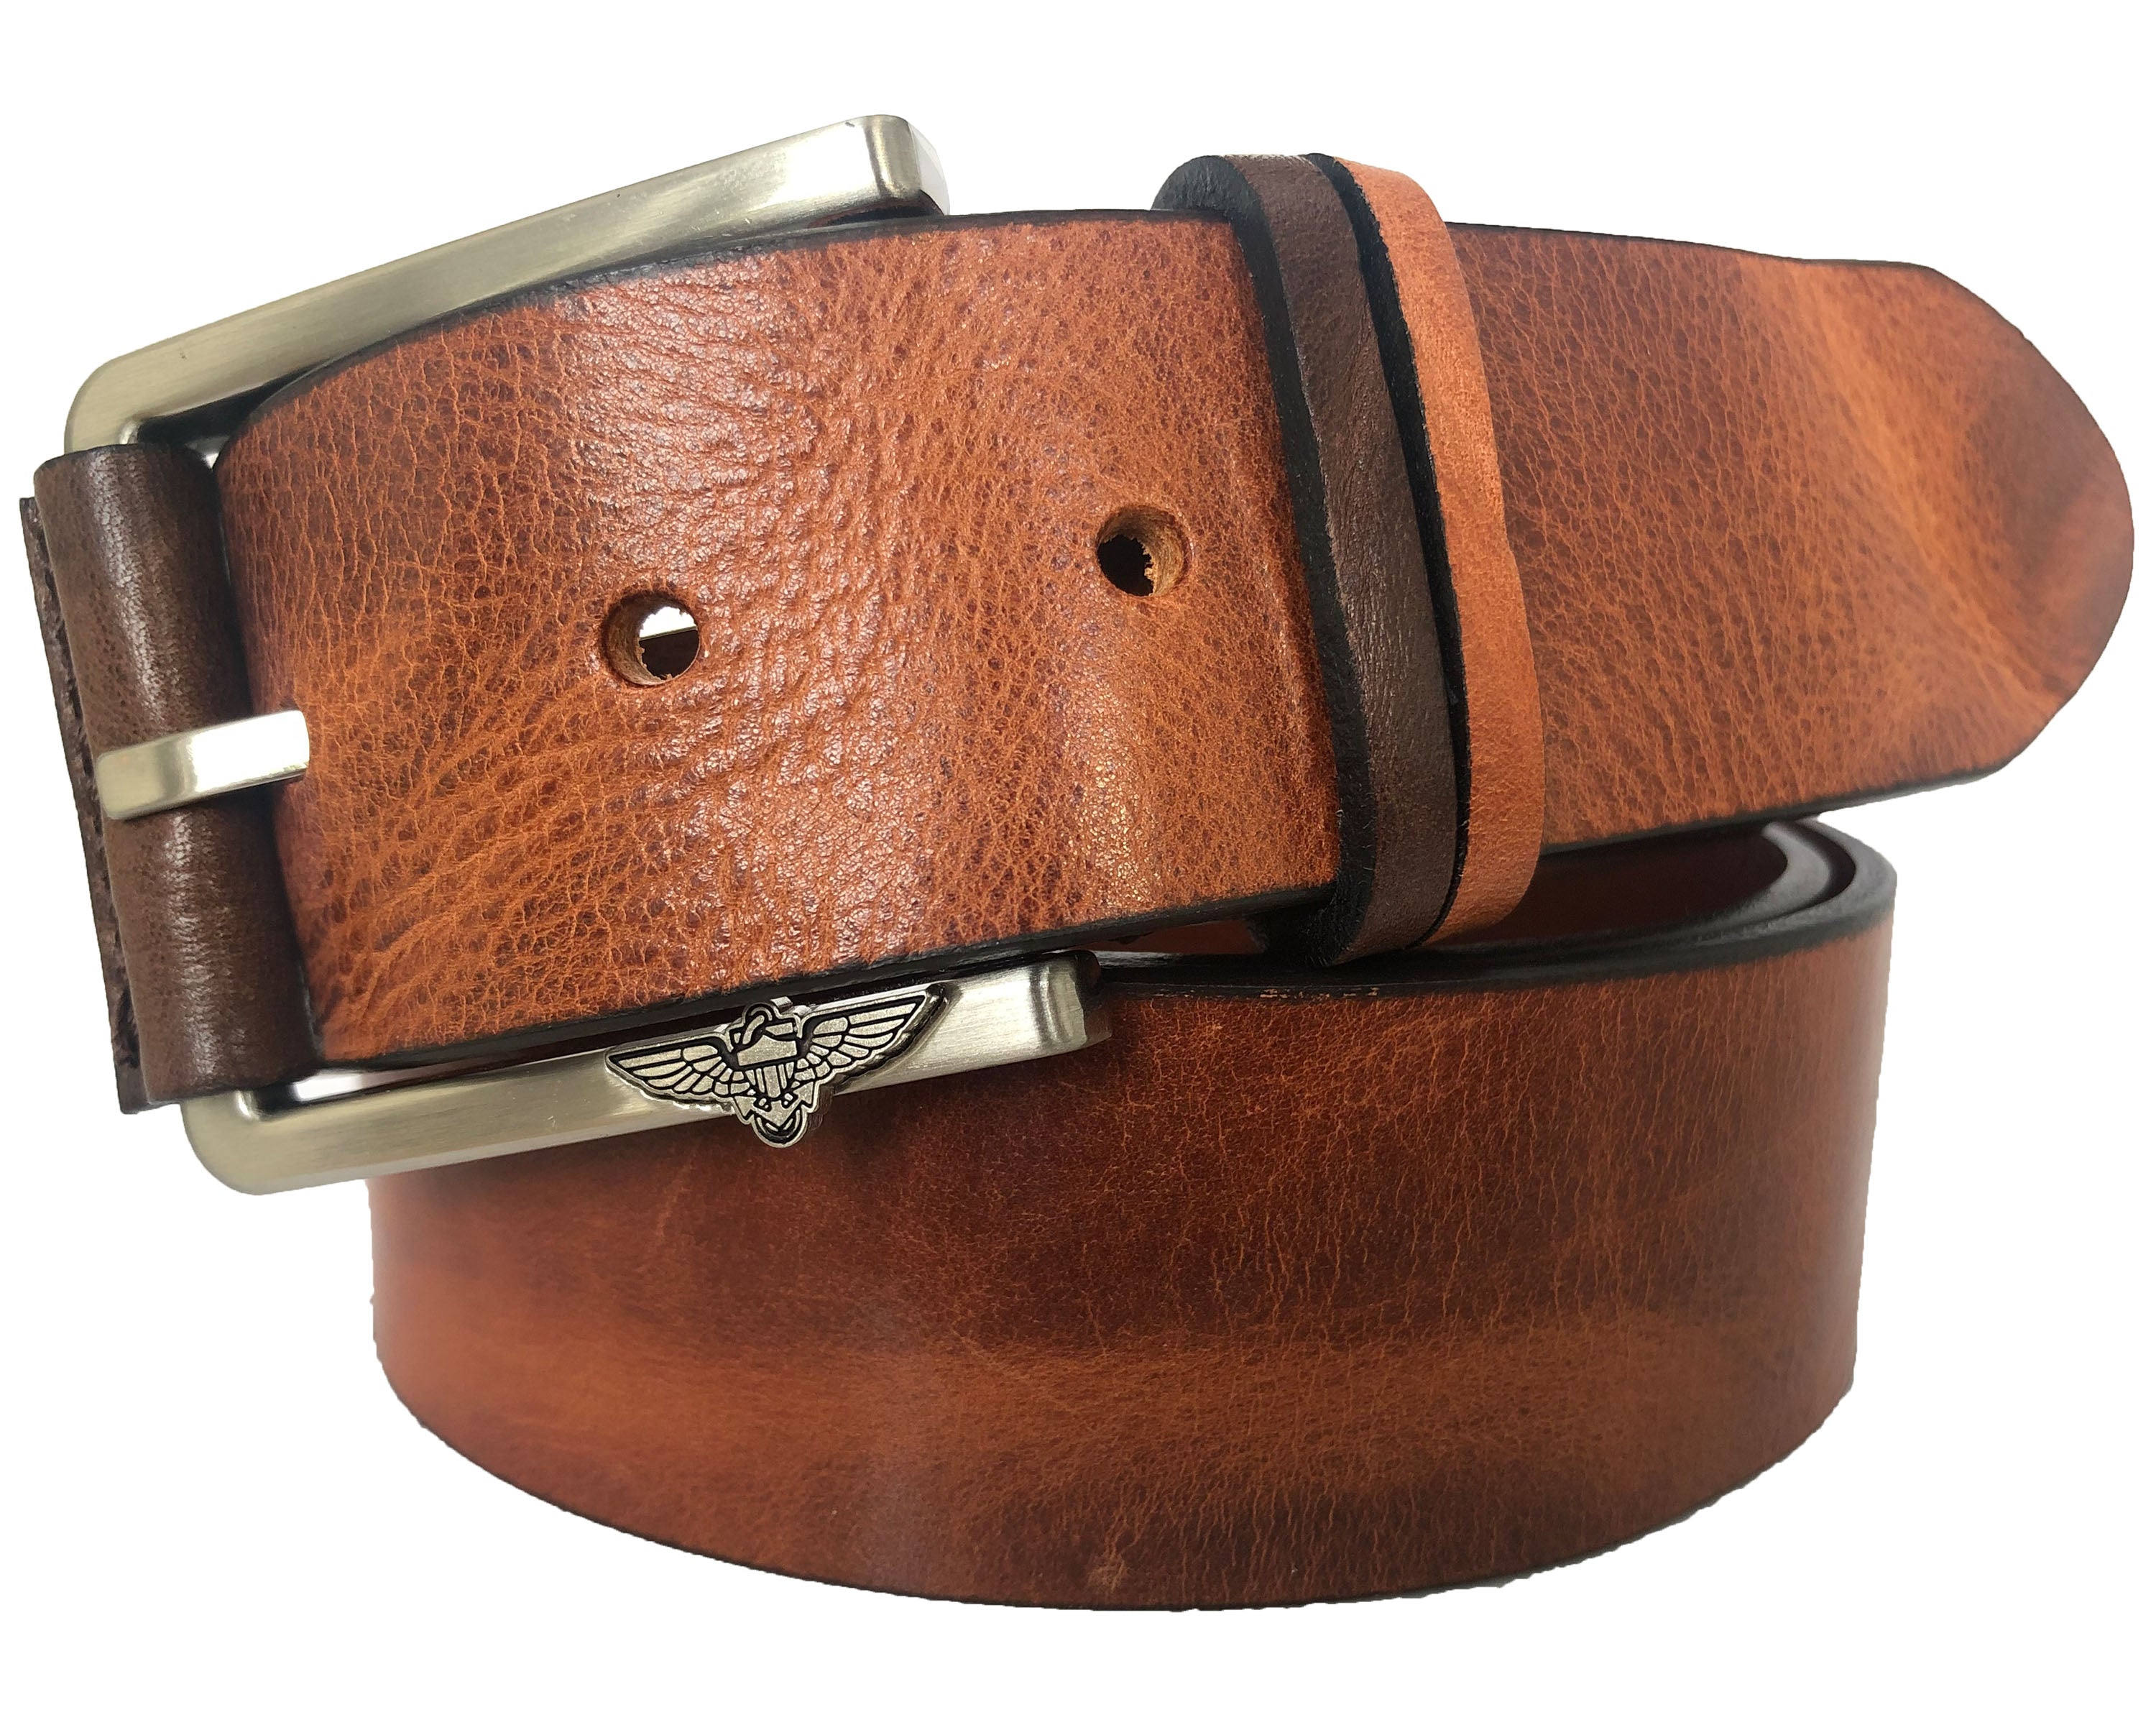 TAN DISTRESSED HIDE LEATHER BELT WITH LEATHER EAGLE BUCKLE TAB 40MM